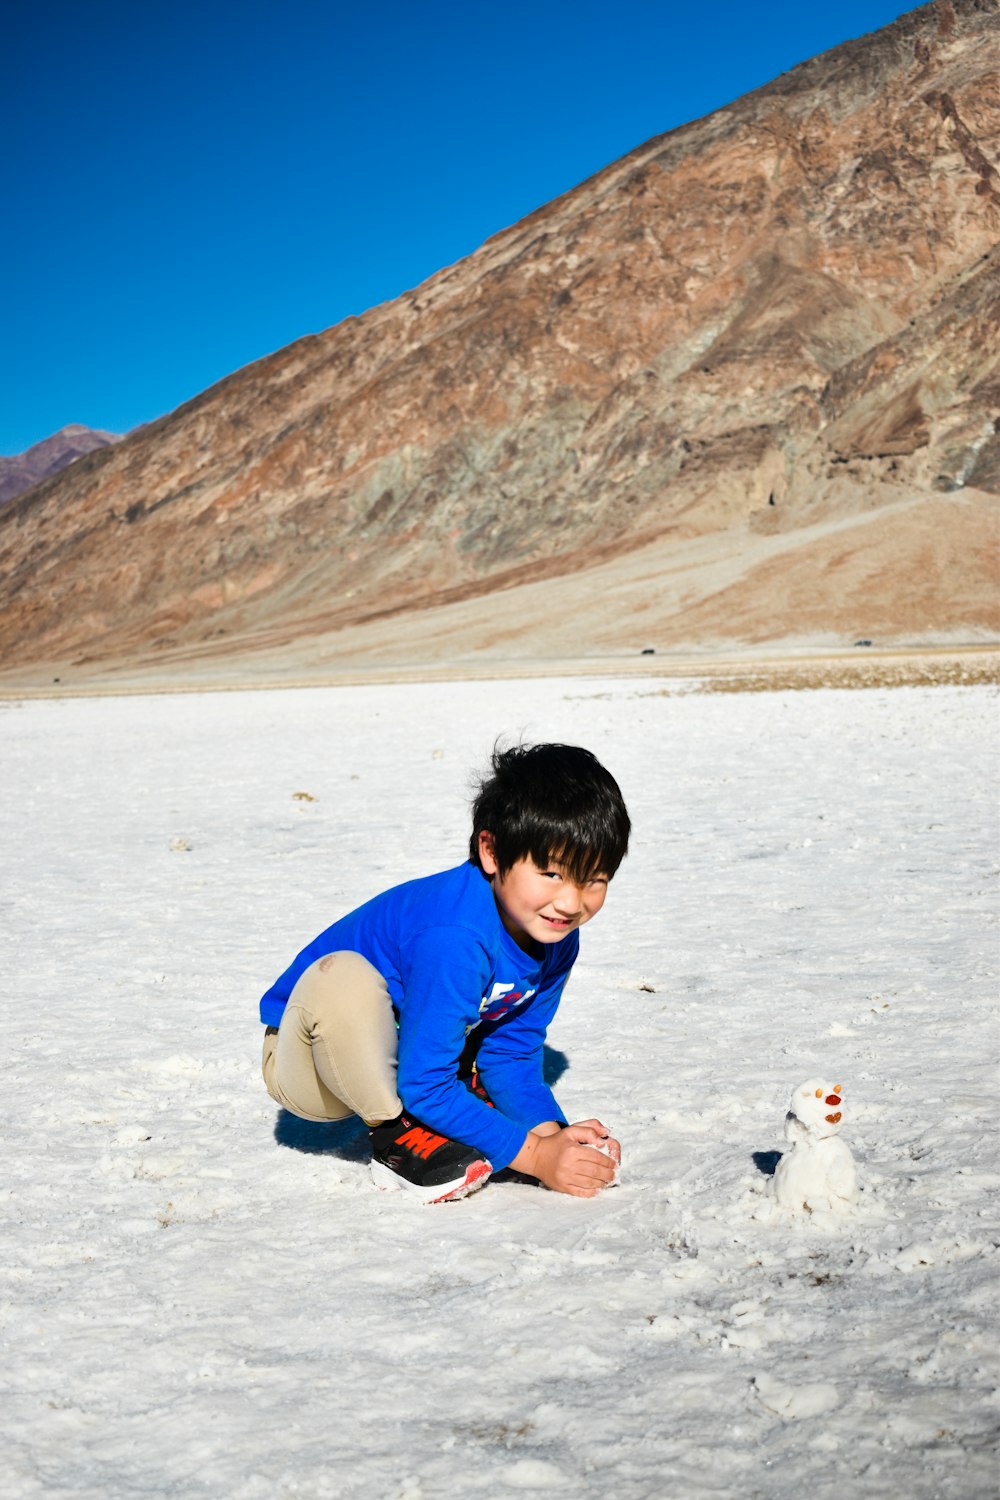 boy in blue and red jacket playing on snow covered ground during daytime